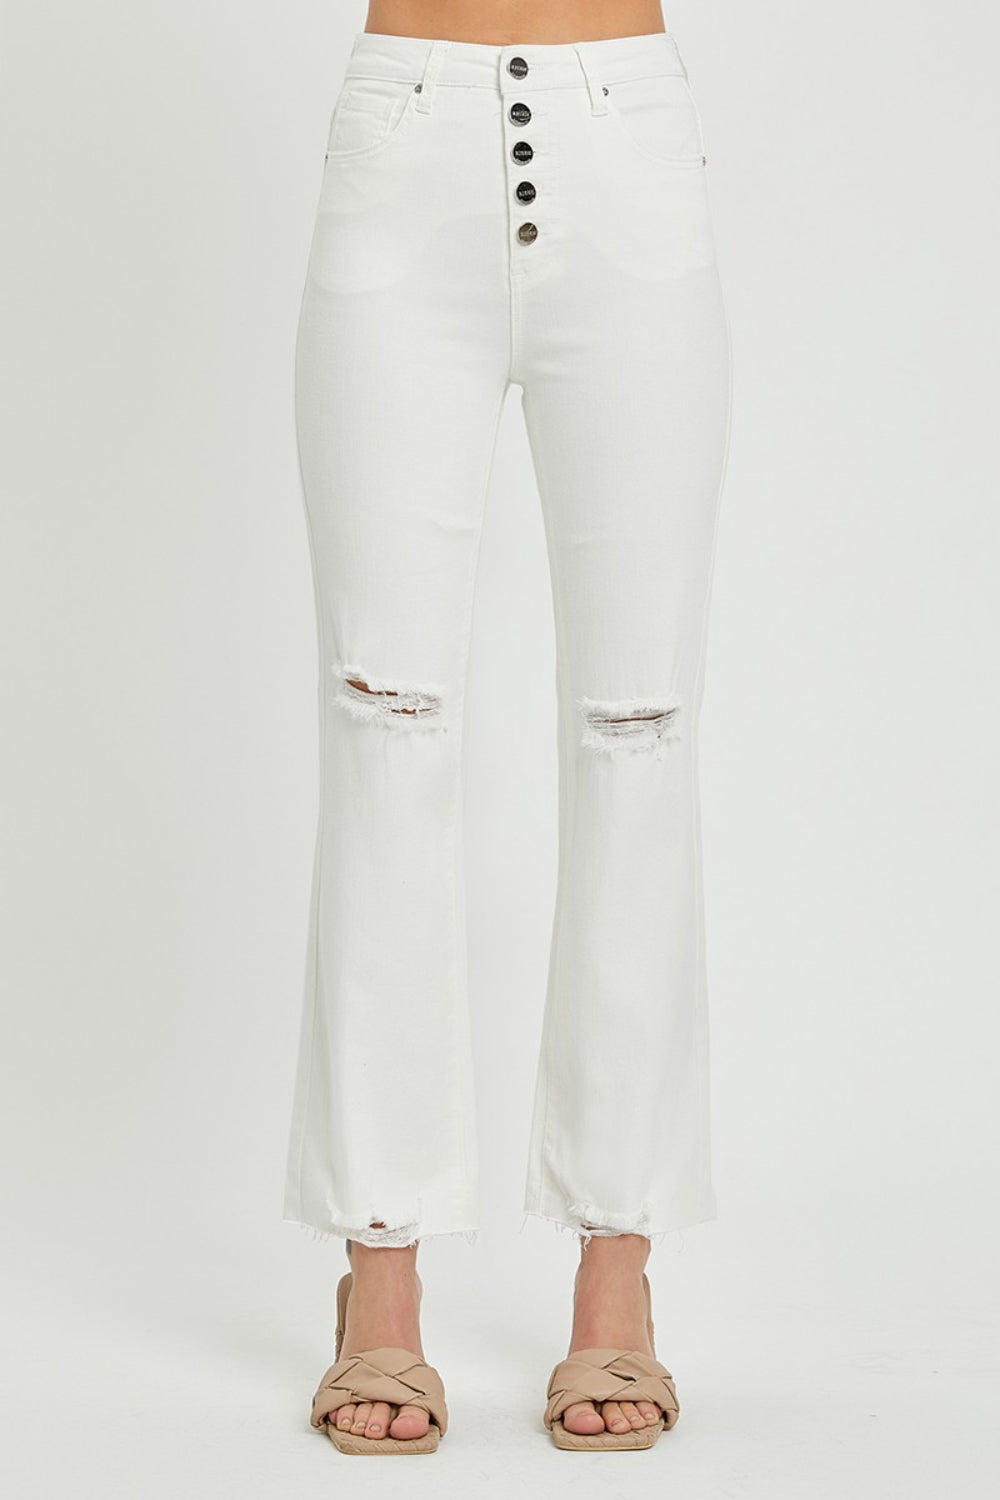 Allie High Rise Button Fly Straight Ankle Jeans - Risen